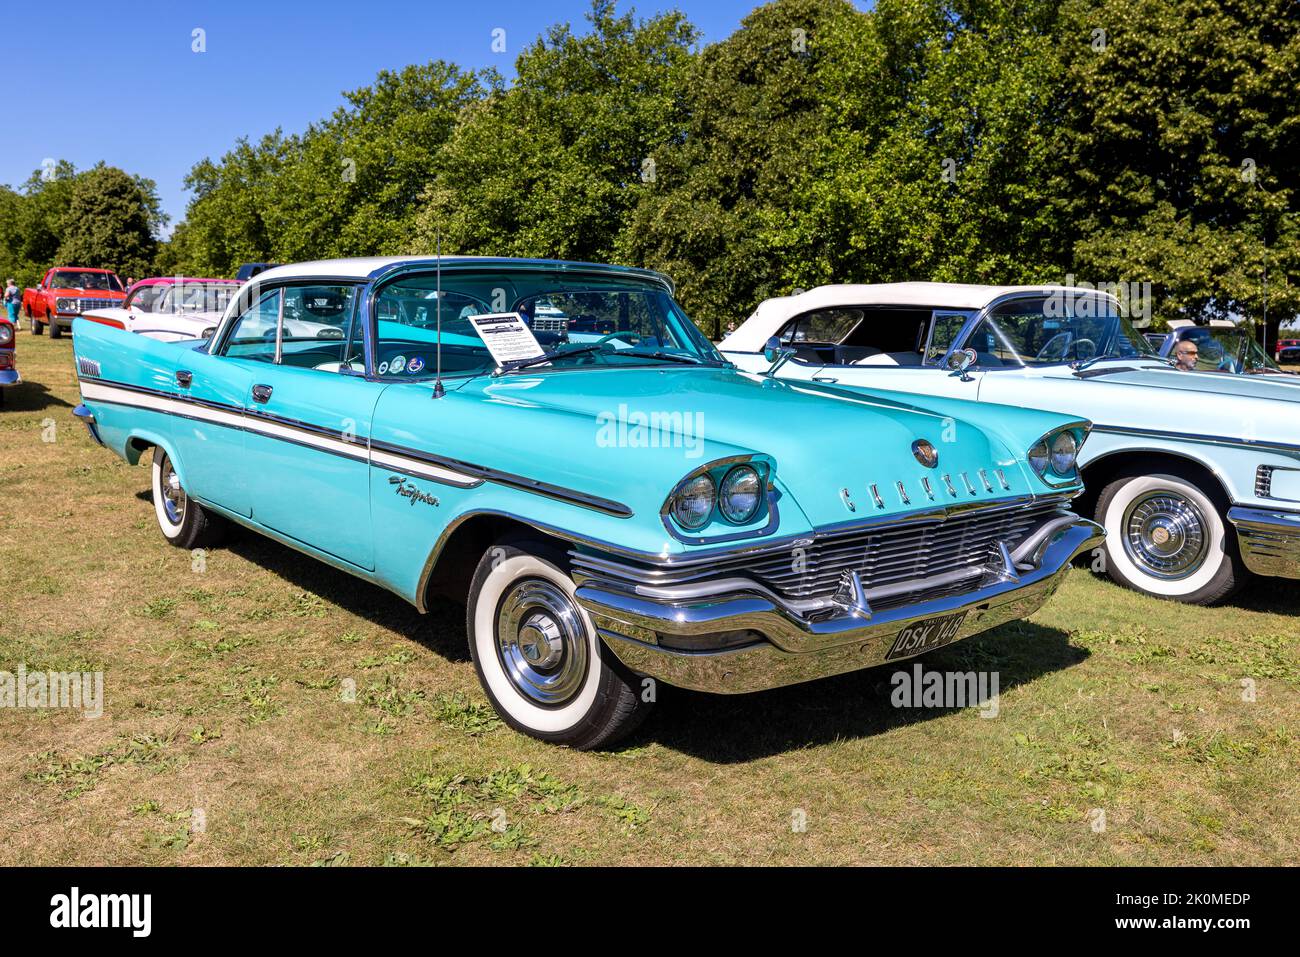 1958 Chrysler New Yorker, on display at the American Auto Club Rally of the Giants, held at Blenheim Palace on the 10 July 2022 Stock Photo